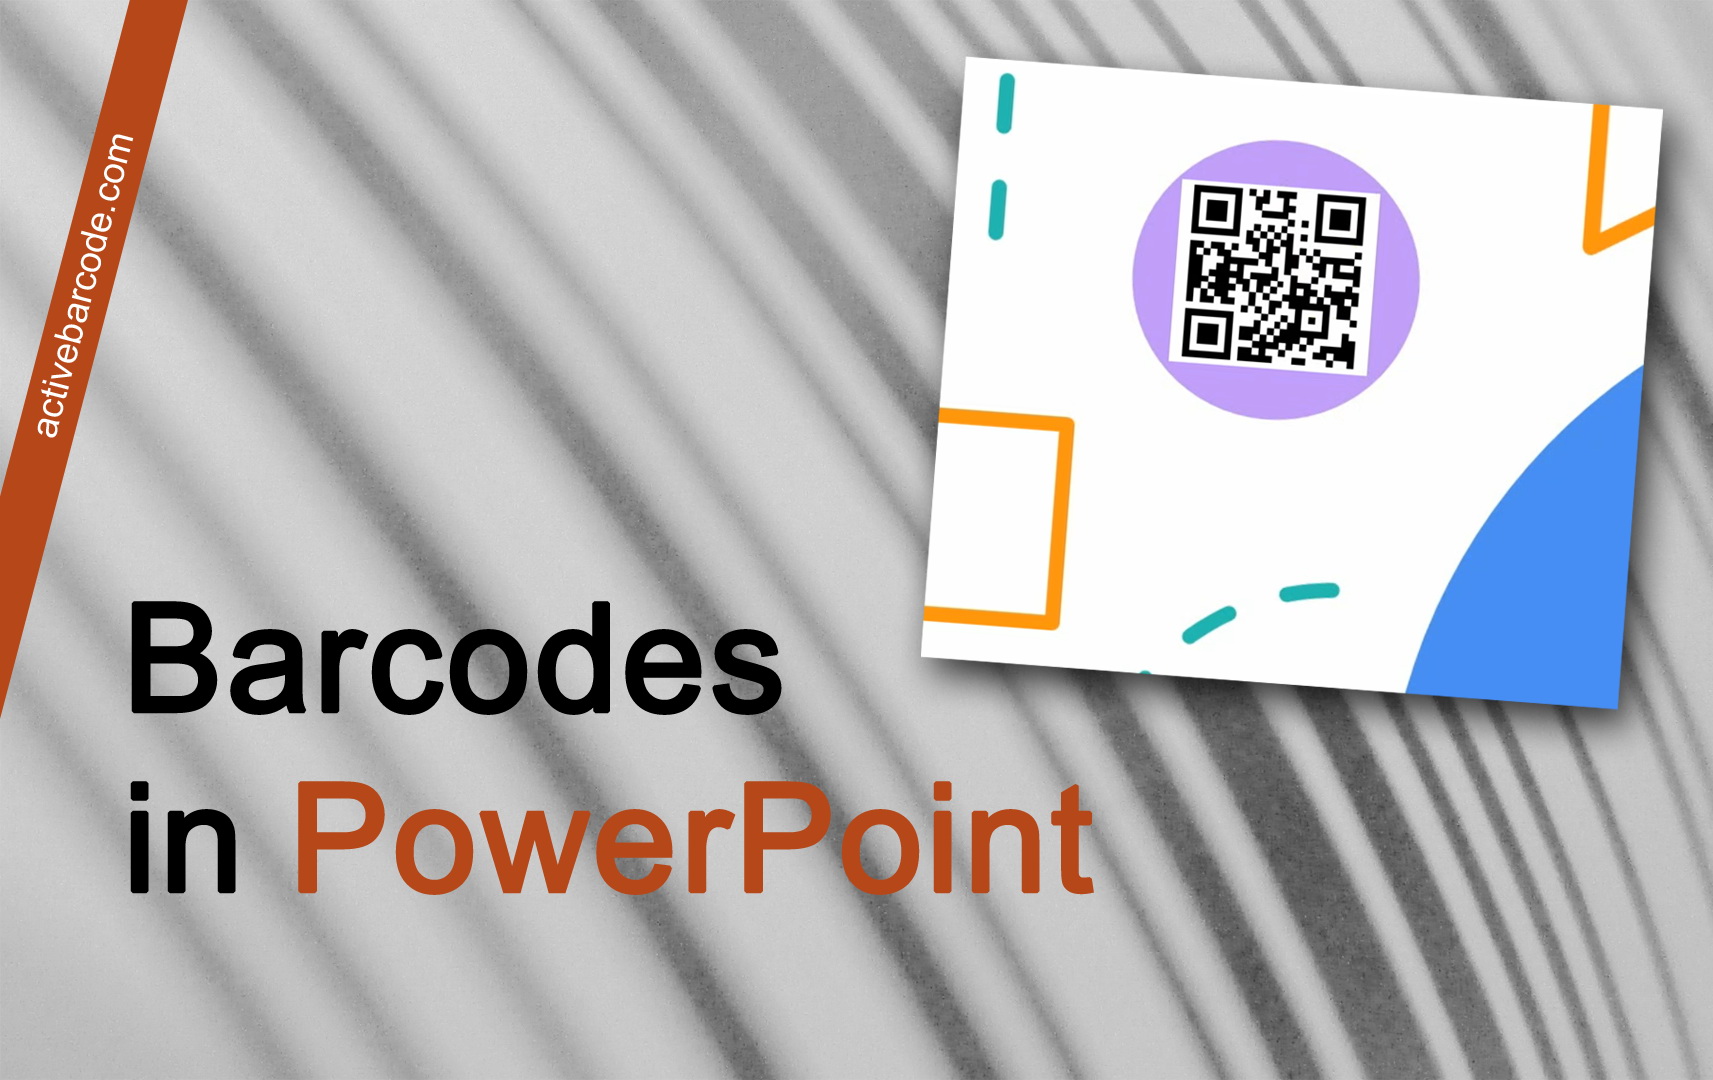 ActiveBarcode: How to embed a barcode into a PowerPoint presentation using the Add-In